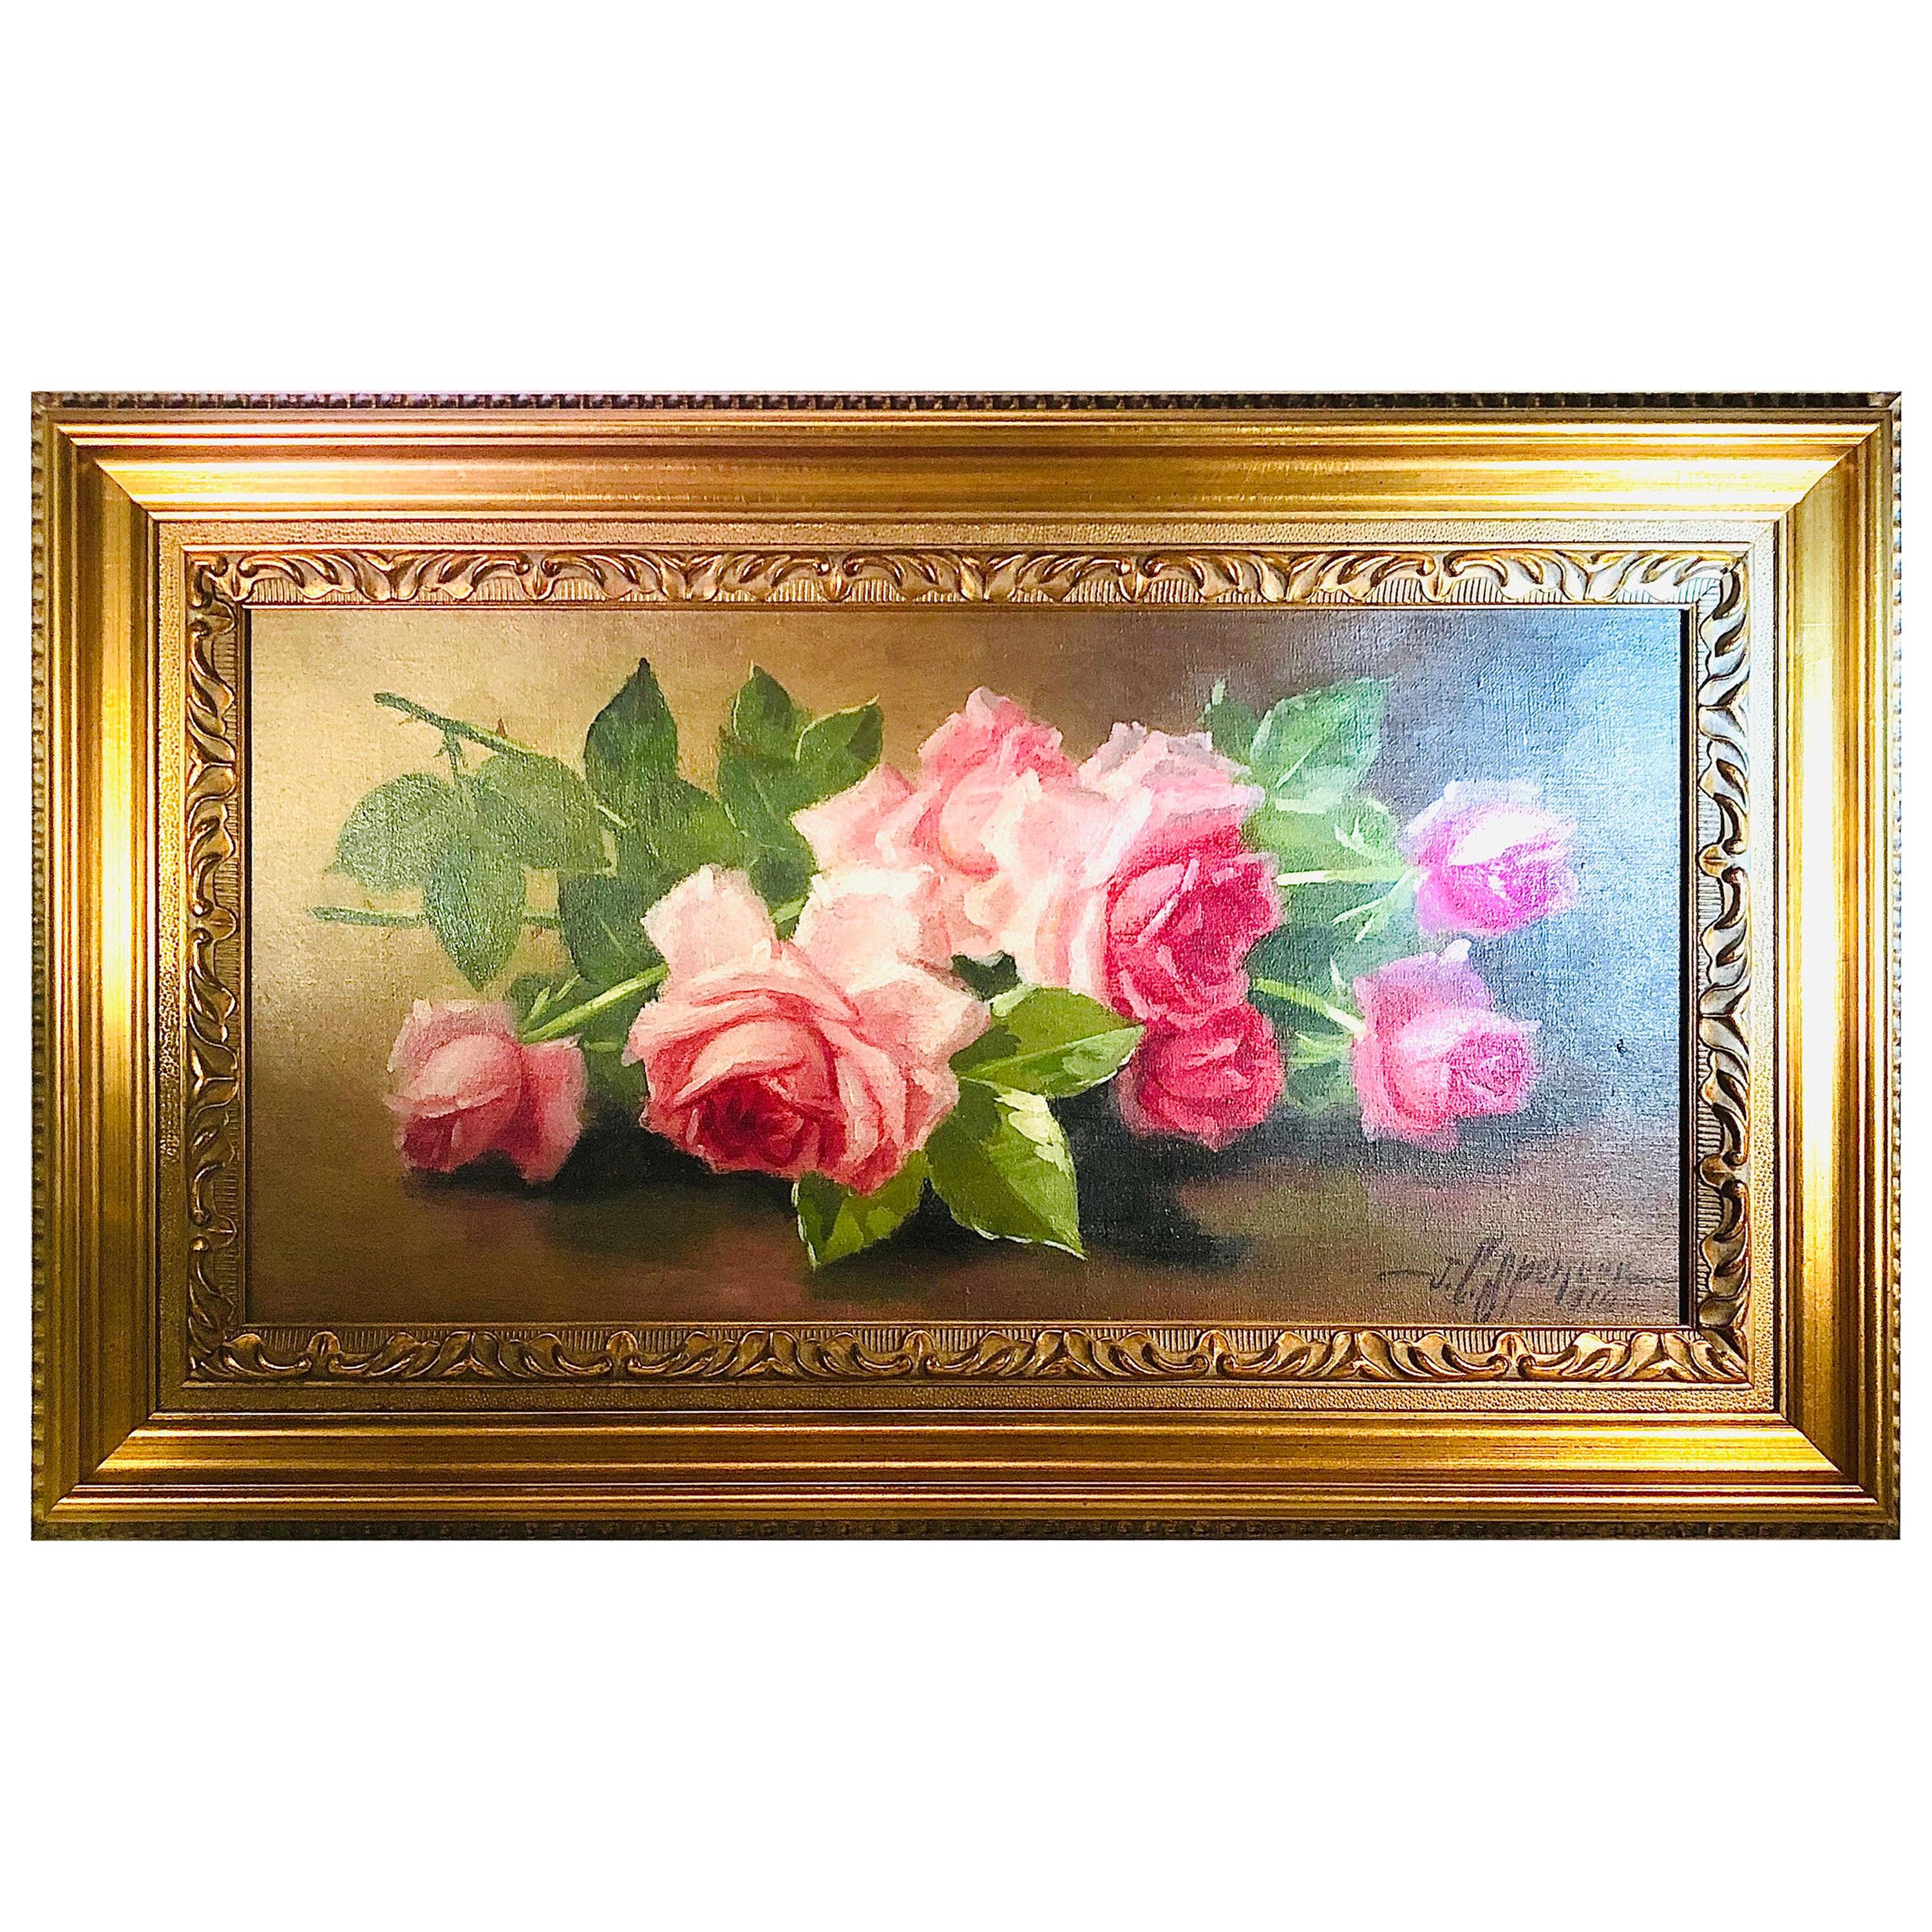 Oil on Canvas of Pink Roses Signed J. C. Spencer and Dated 1916